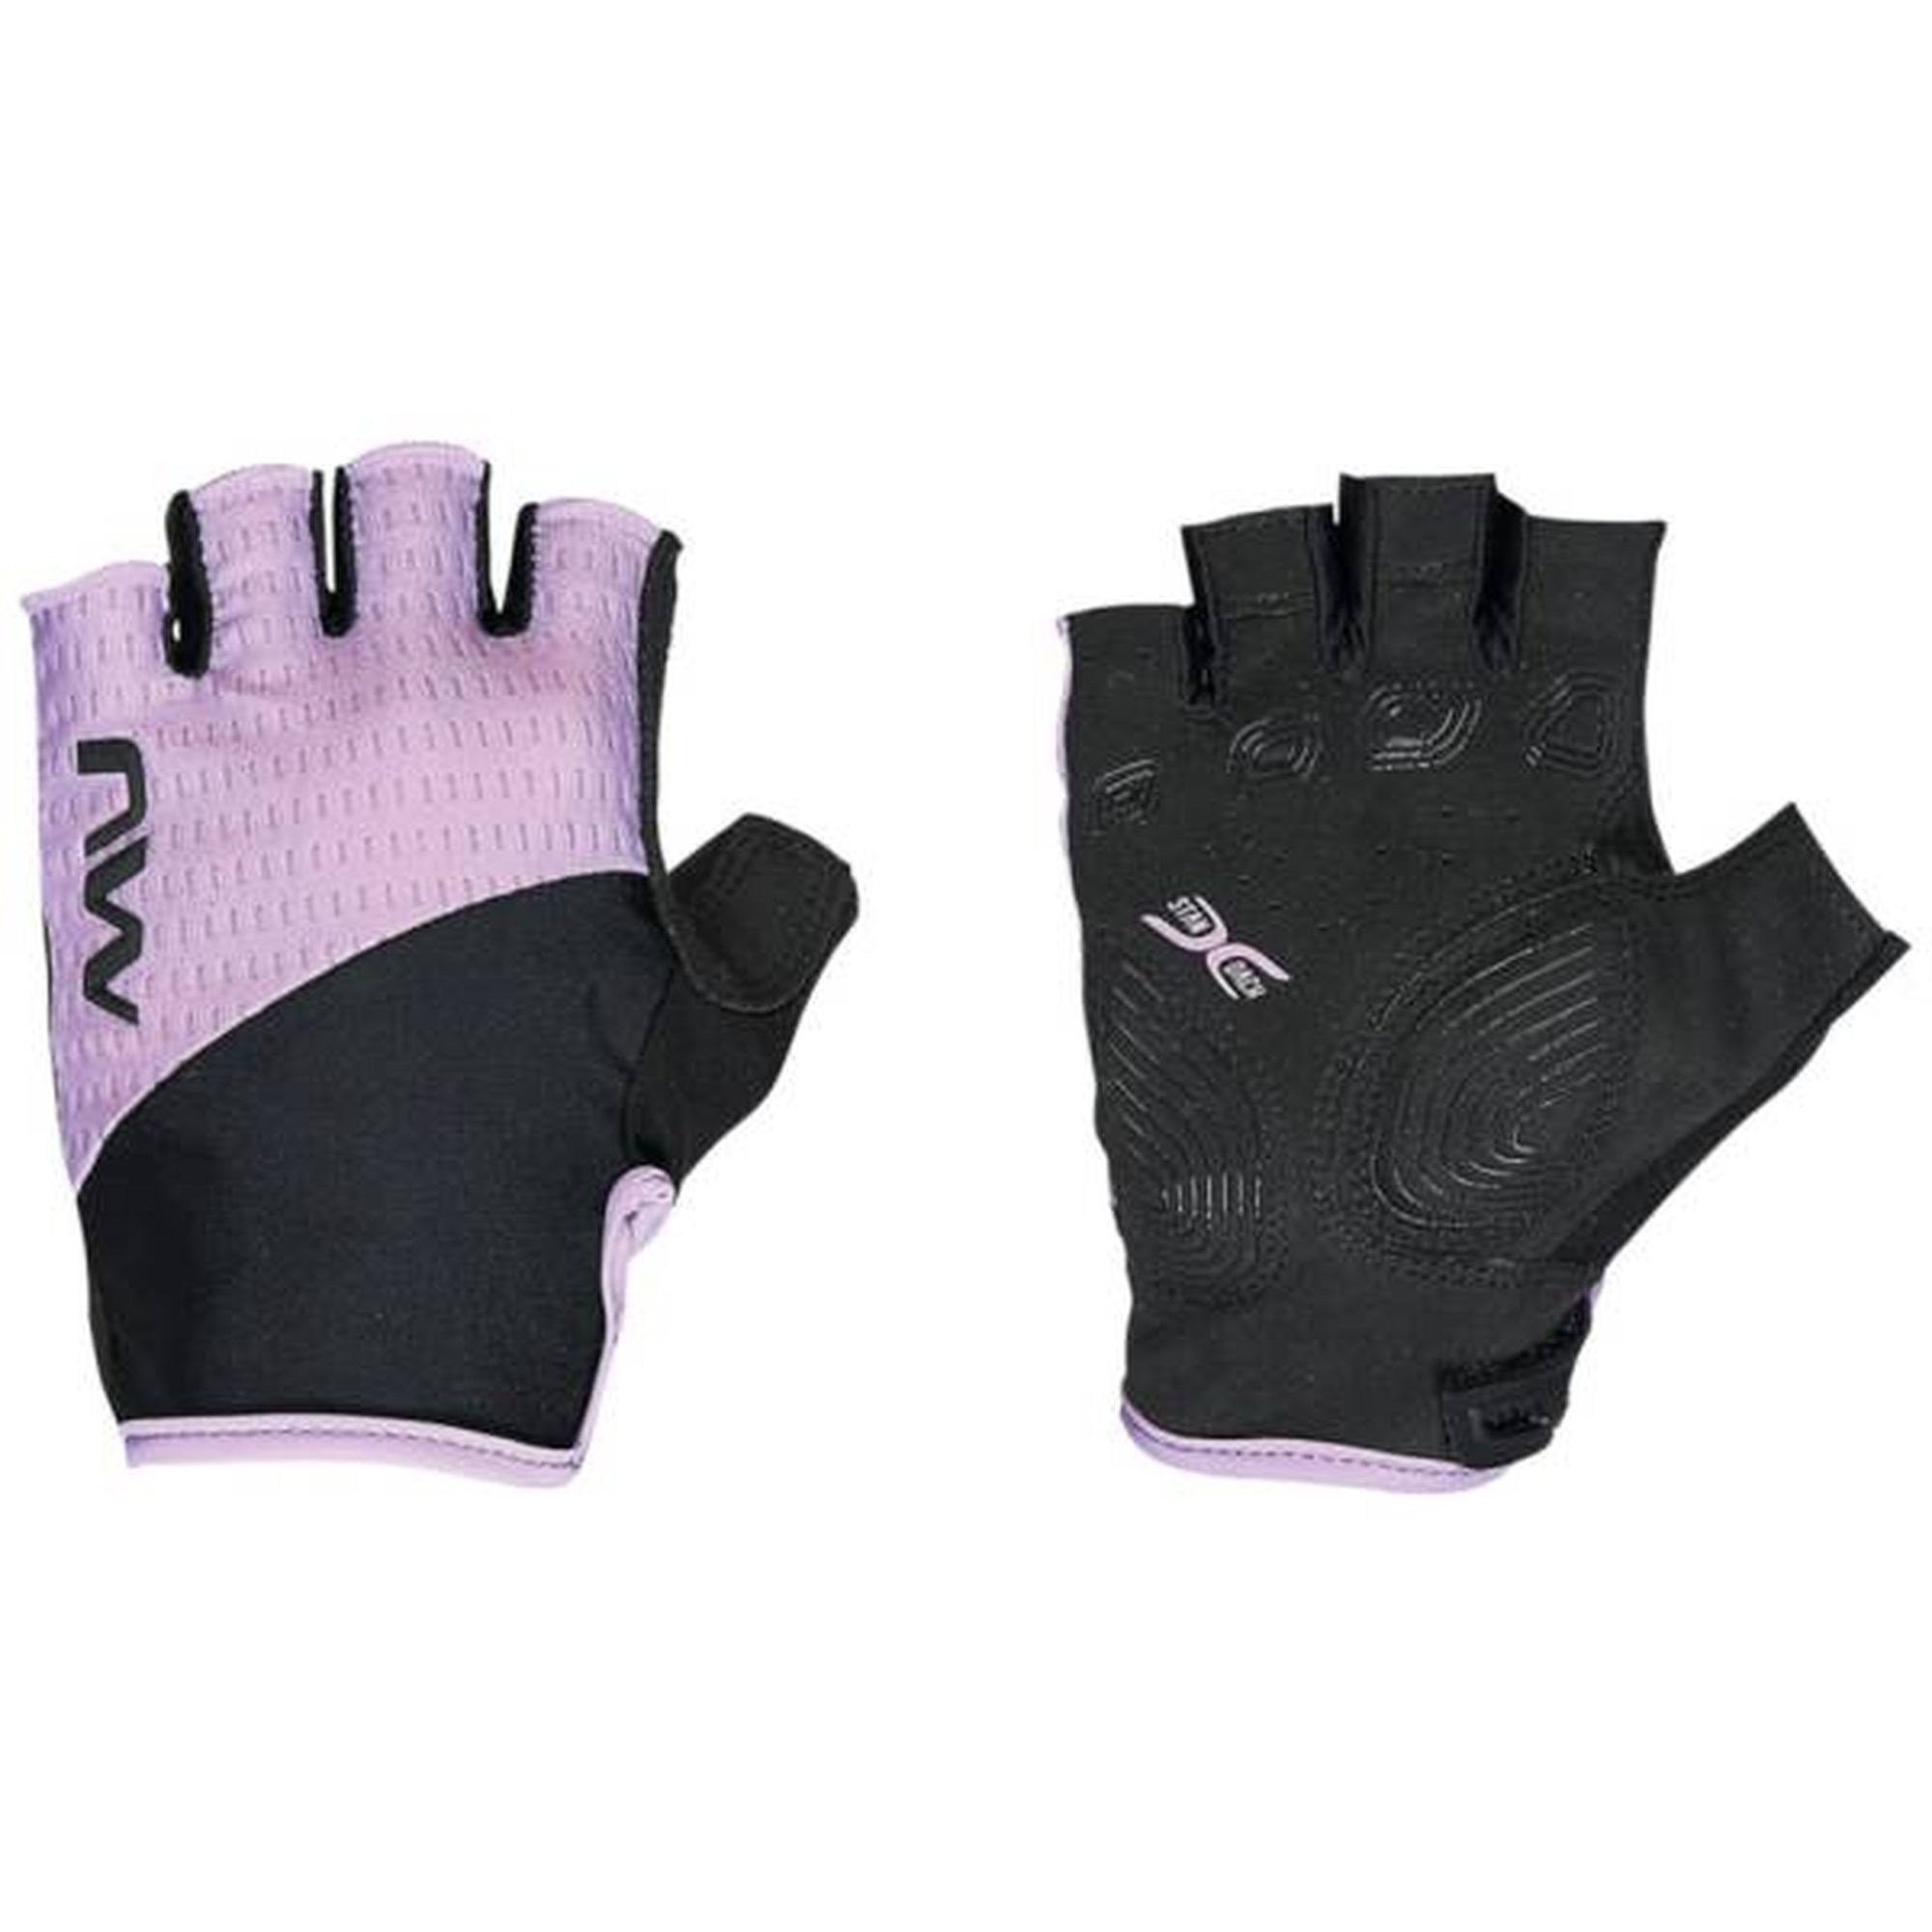 Northwave Fast Woman Short Finger Glove - Guanti corti ciclismo | Hardloop